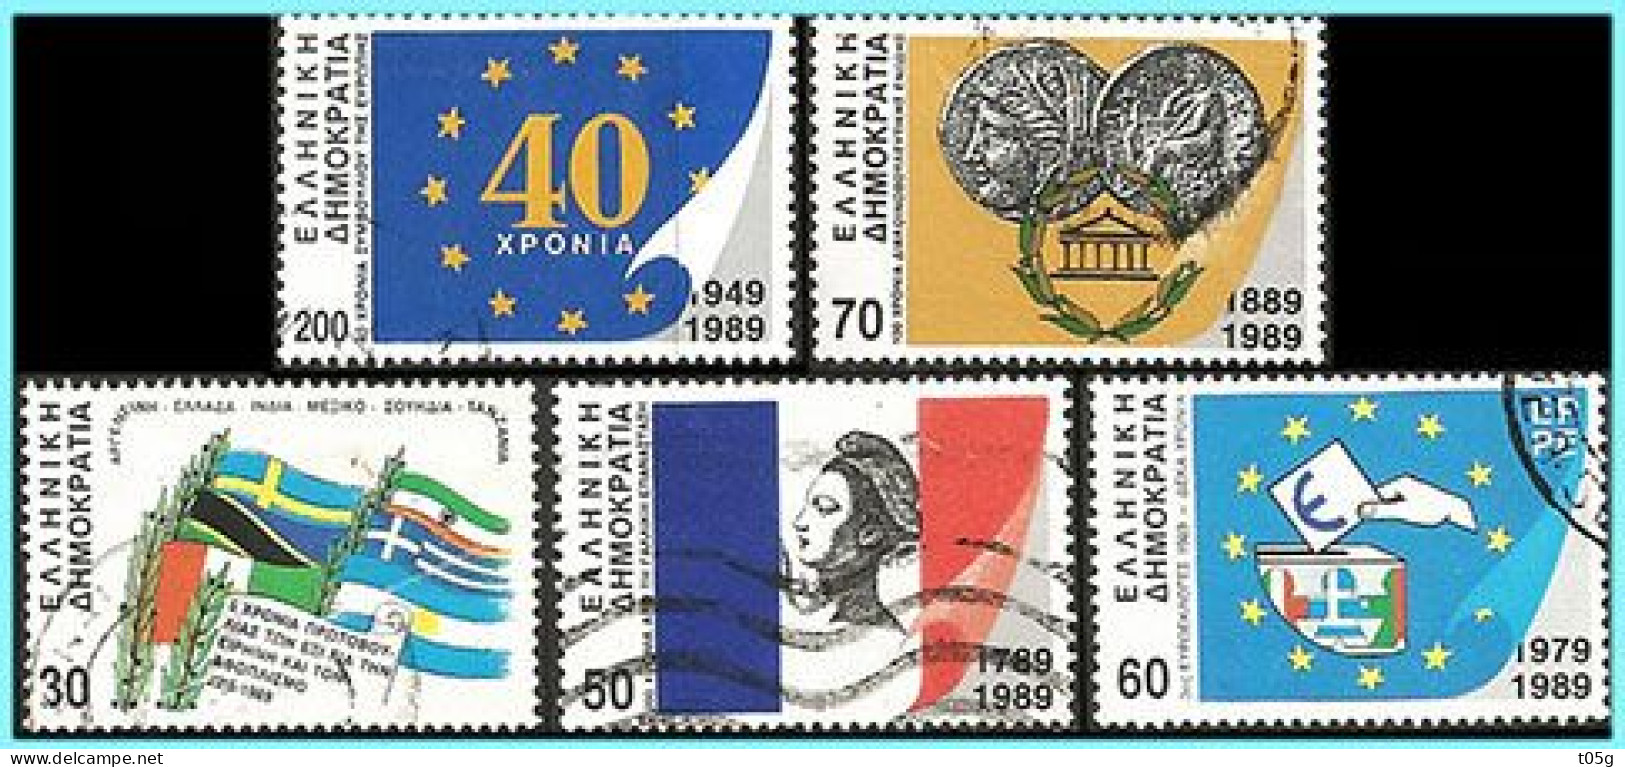 GREECE- GRECE- HELLAS 1989:  Complet Set Used - Used Stamps